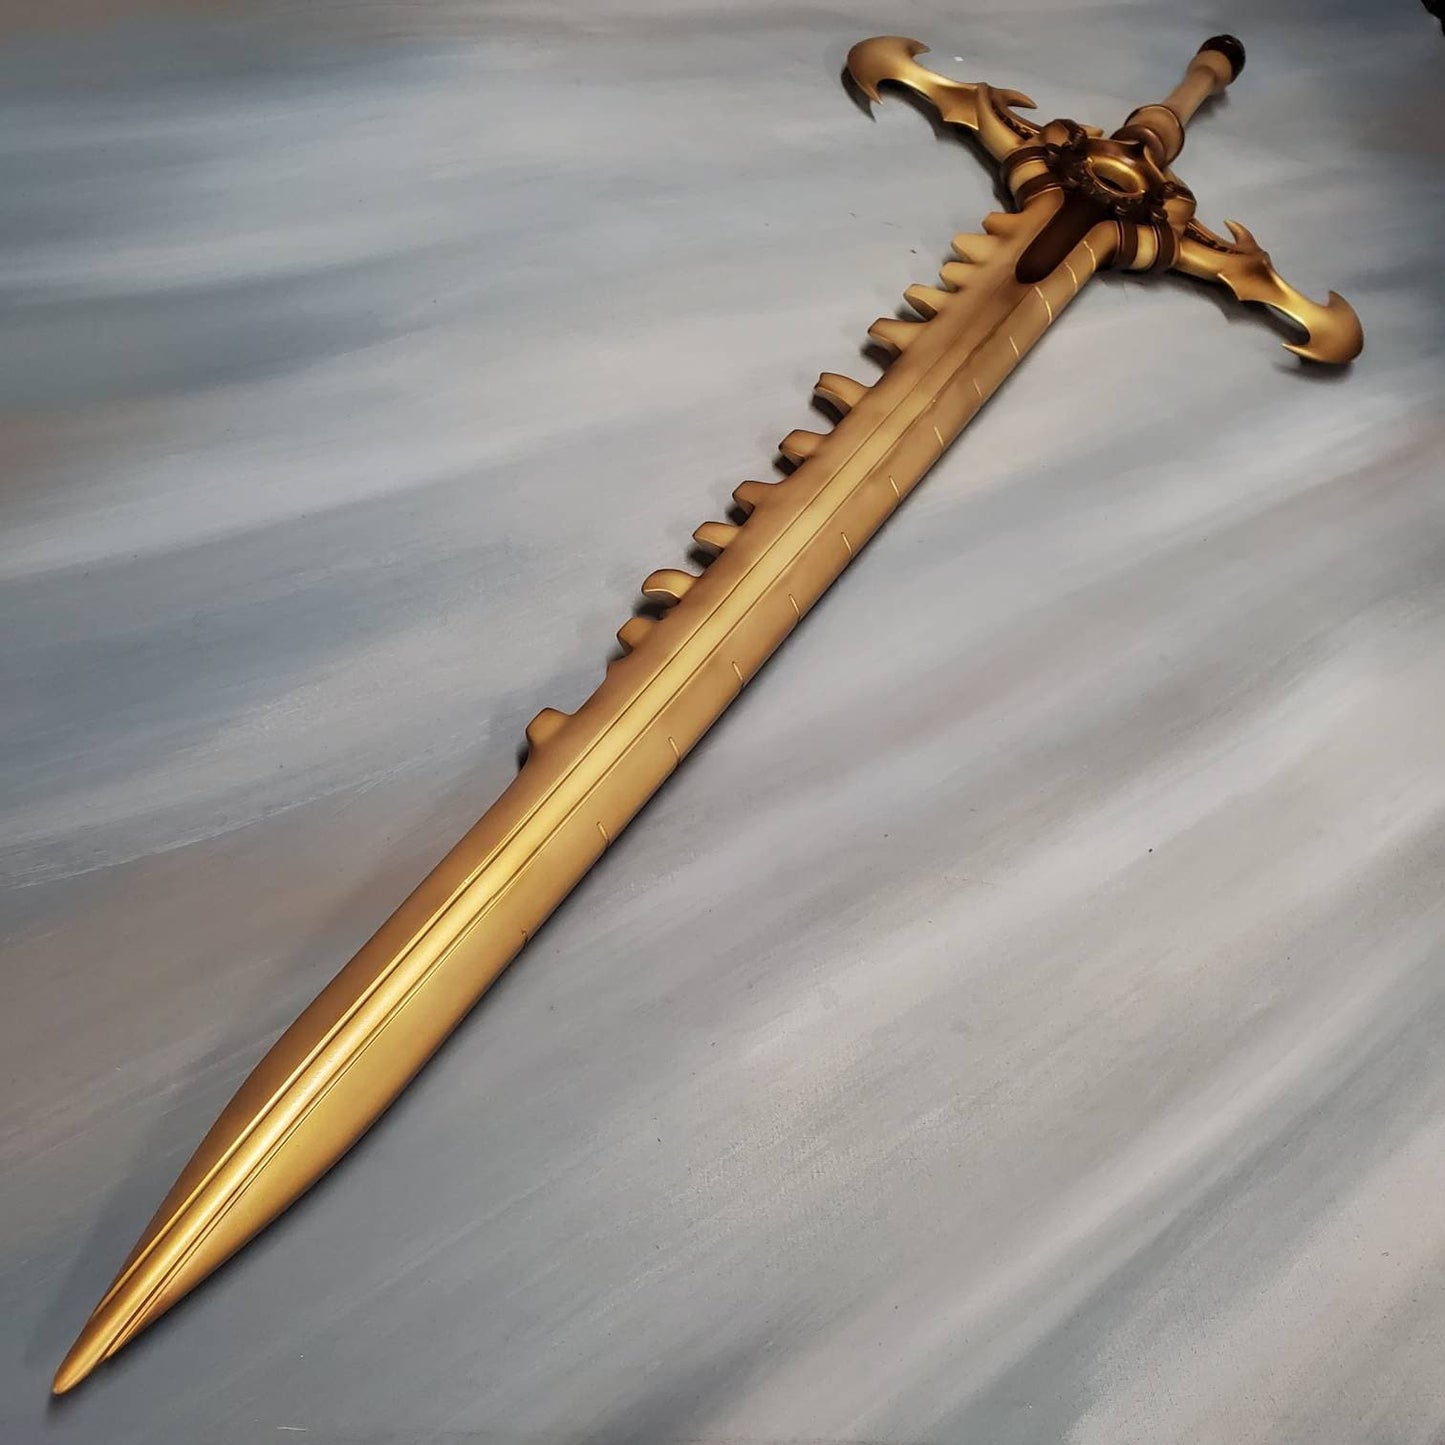 Fire Emblem Three Houses Sword of the Creator/Byleth Sword - 3D printed Kit